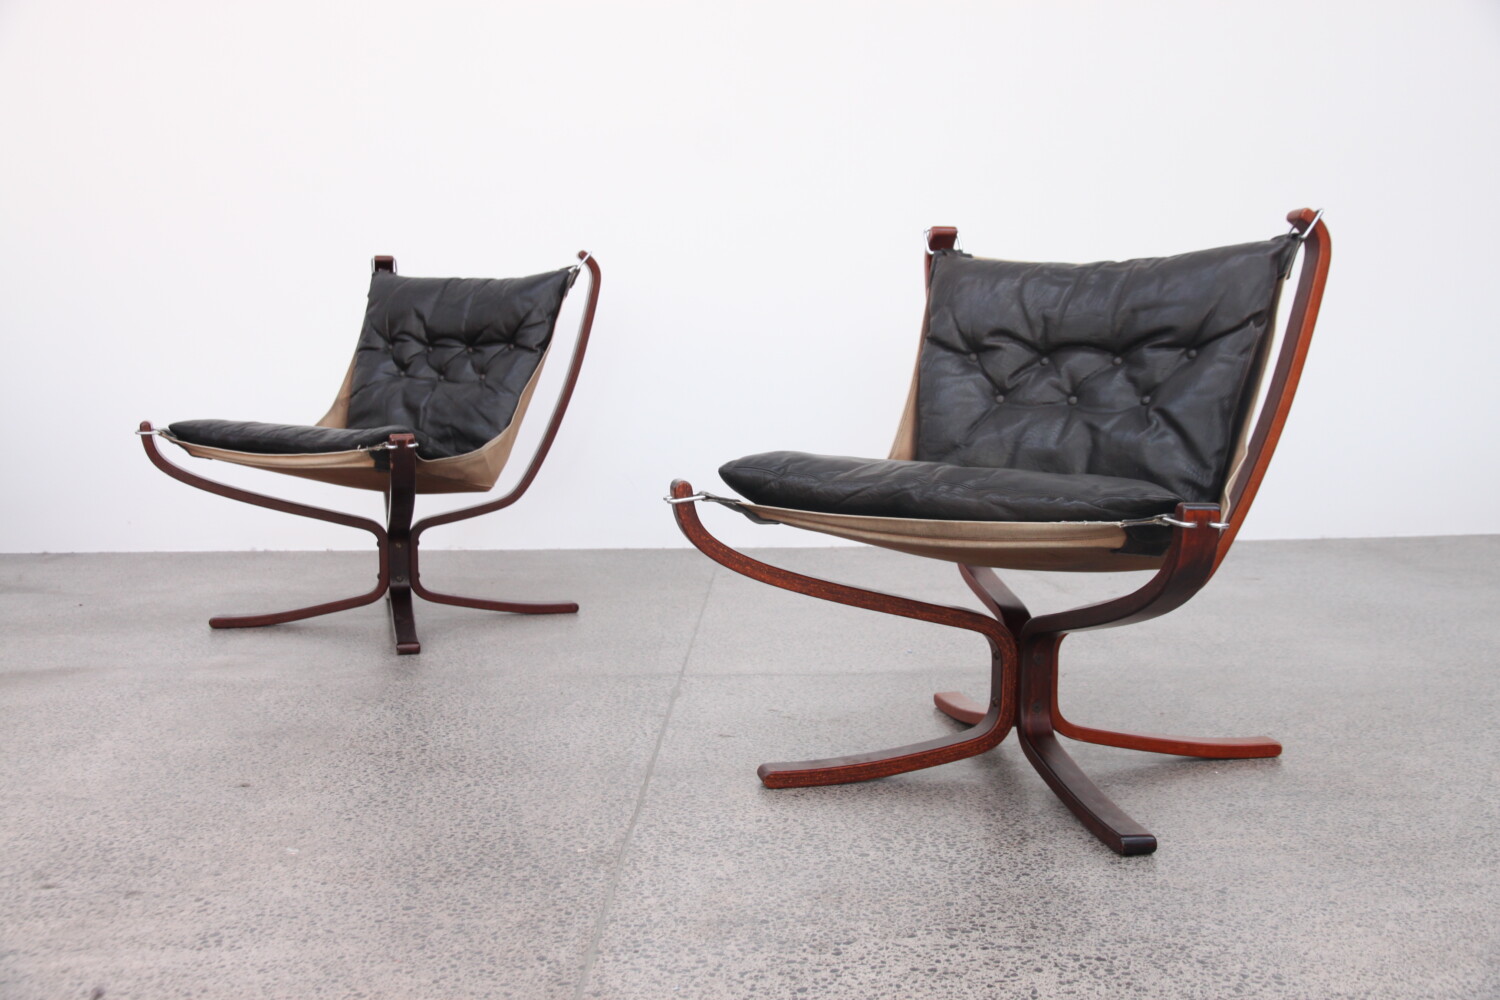 Pair of Black Falcon Chairs